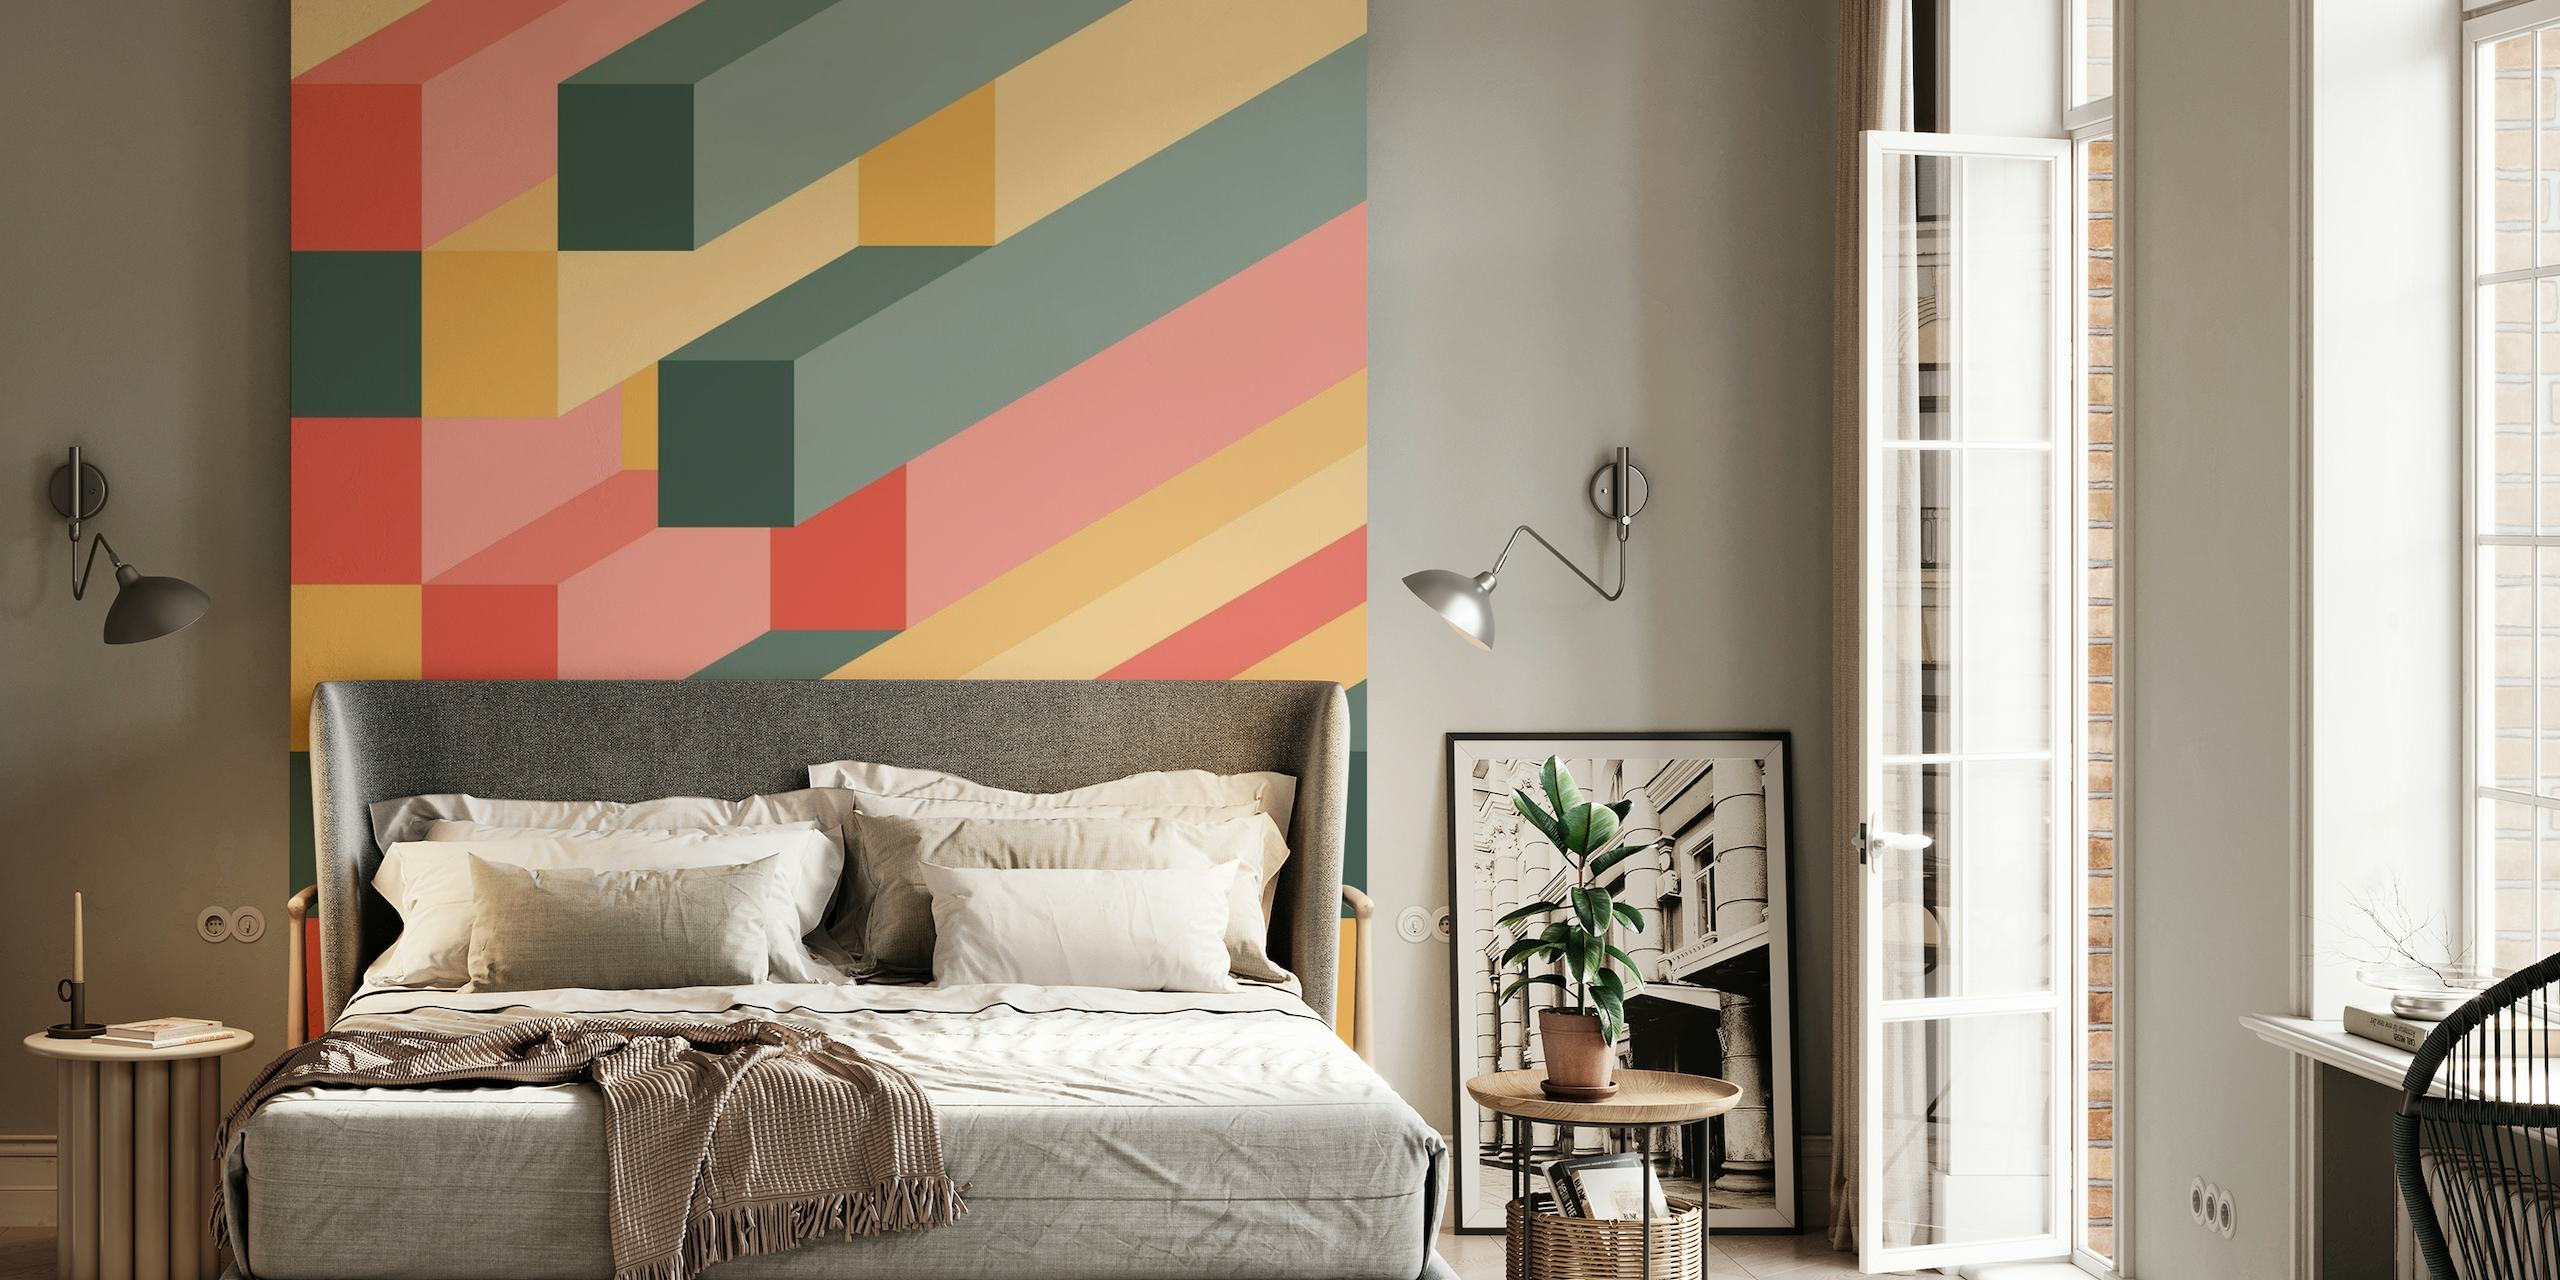 Isometric Blocks Wall Mural with 3D Cubes in Warm Hues